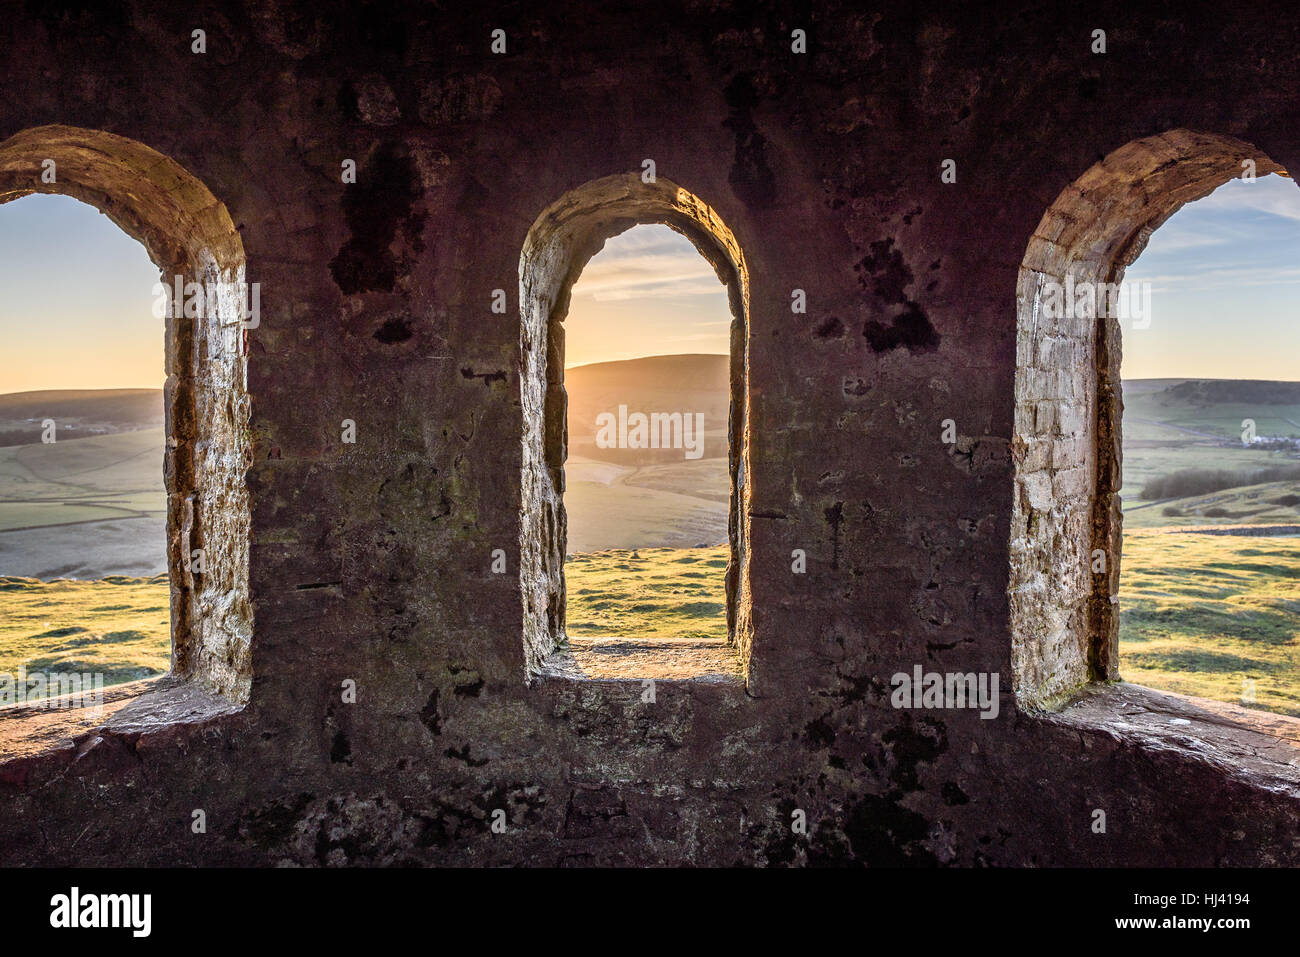 Ancient arch windows in a castle with scenic hills at sunset Stock Photo